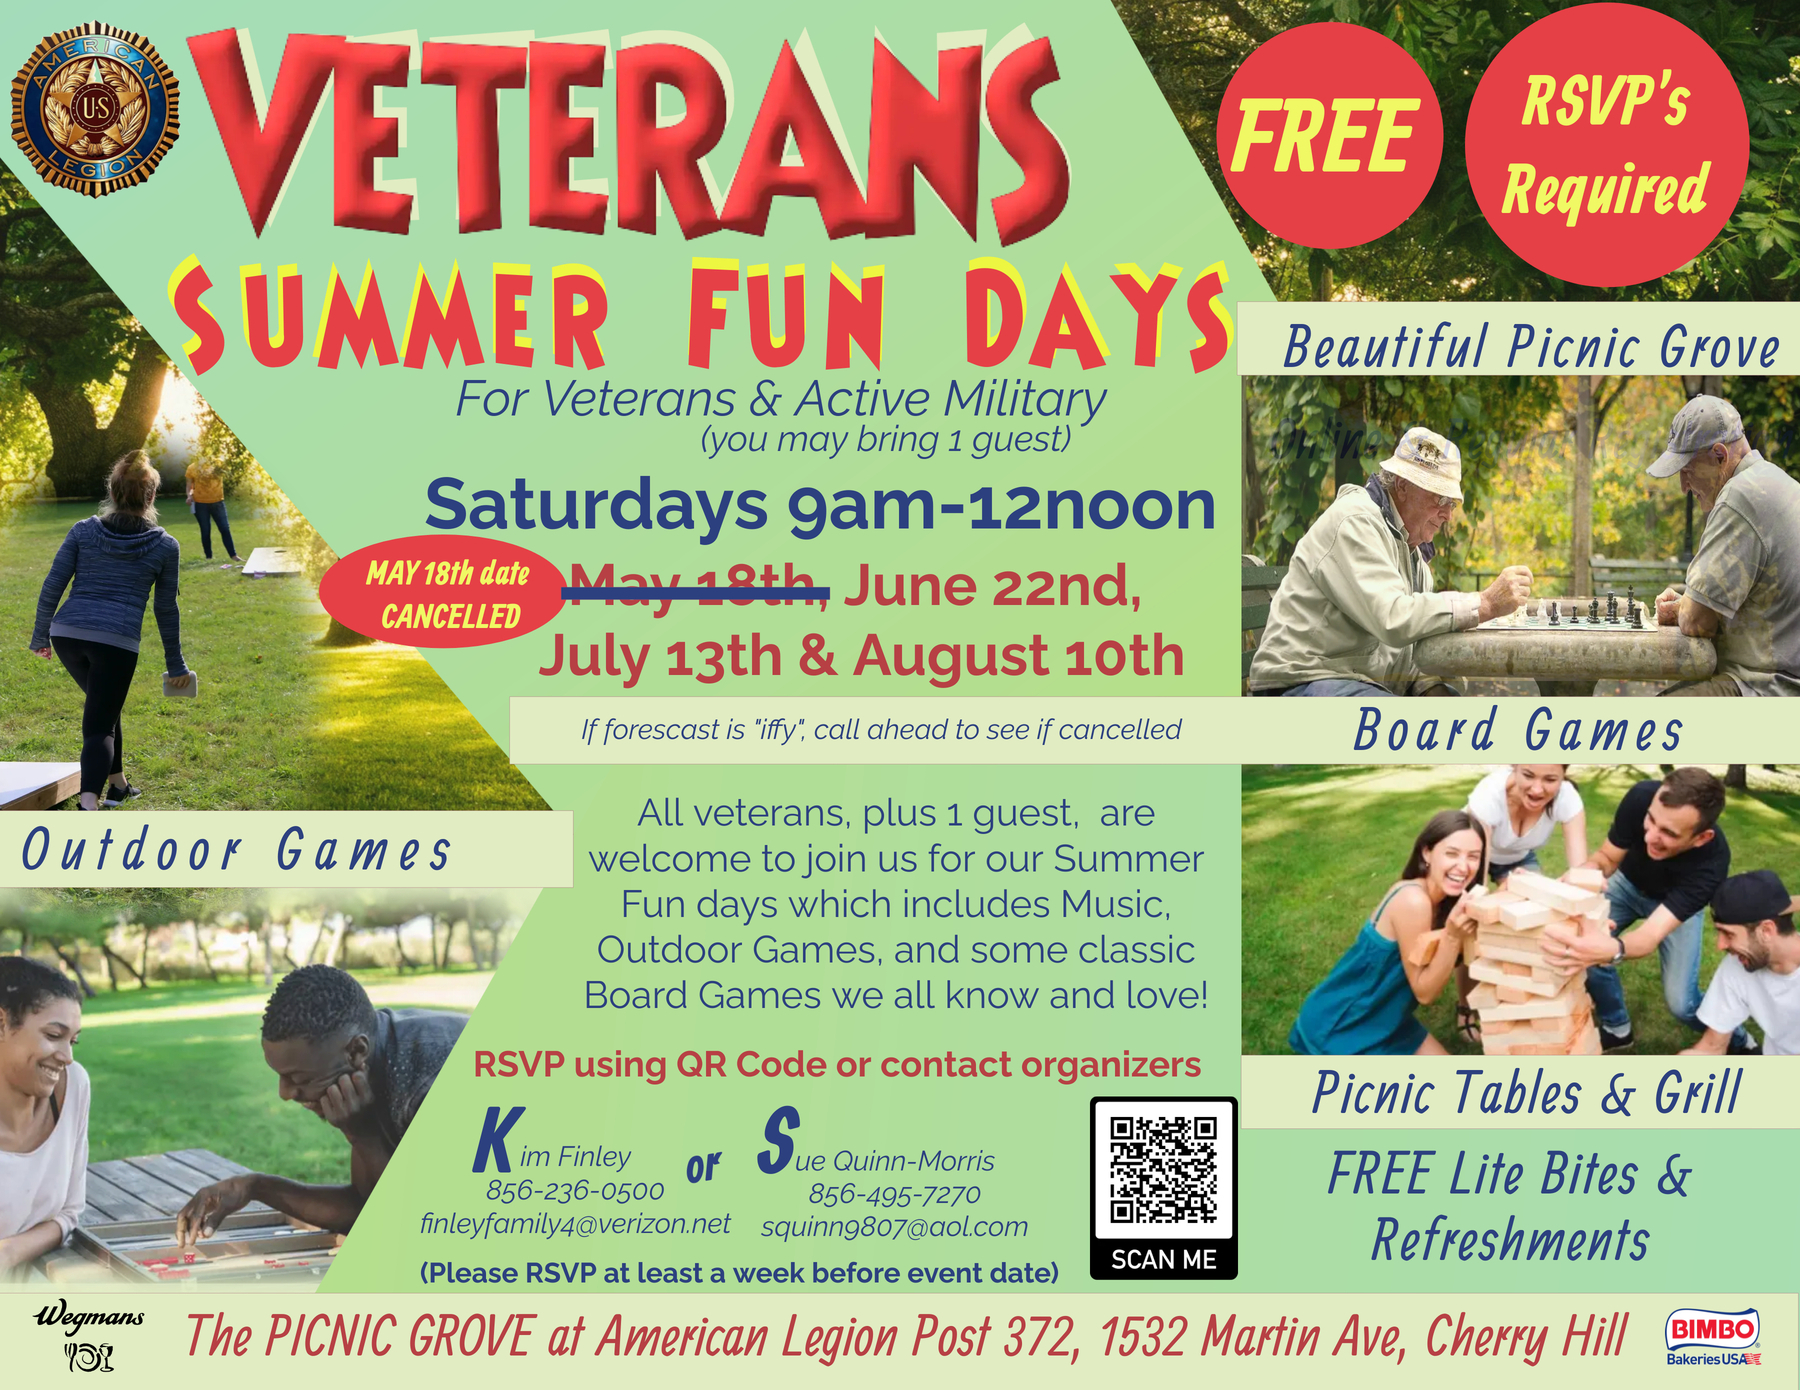 Veterans Summer Fun Days - CANCELLED May 18th Date